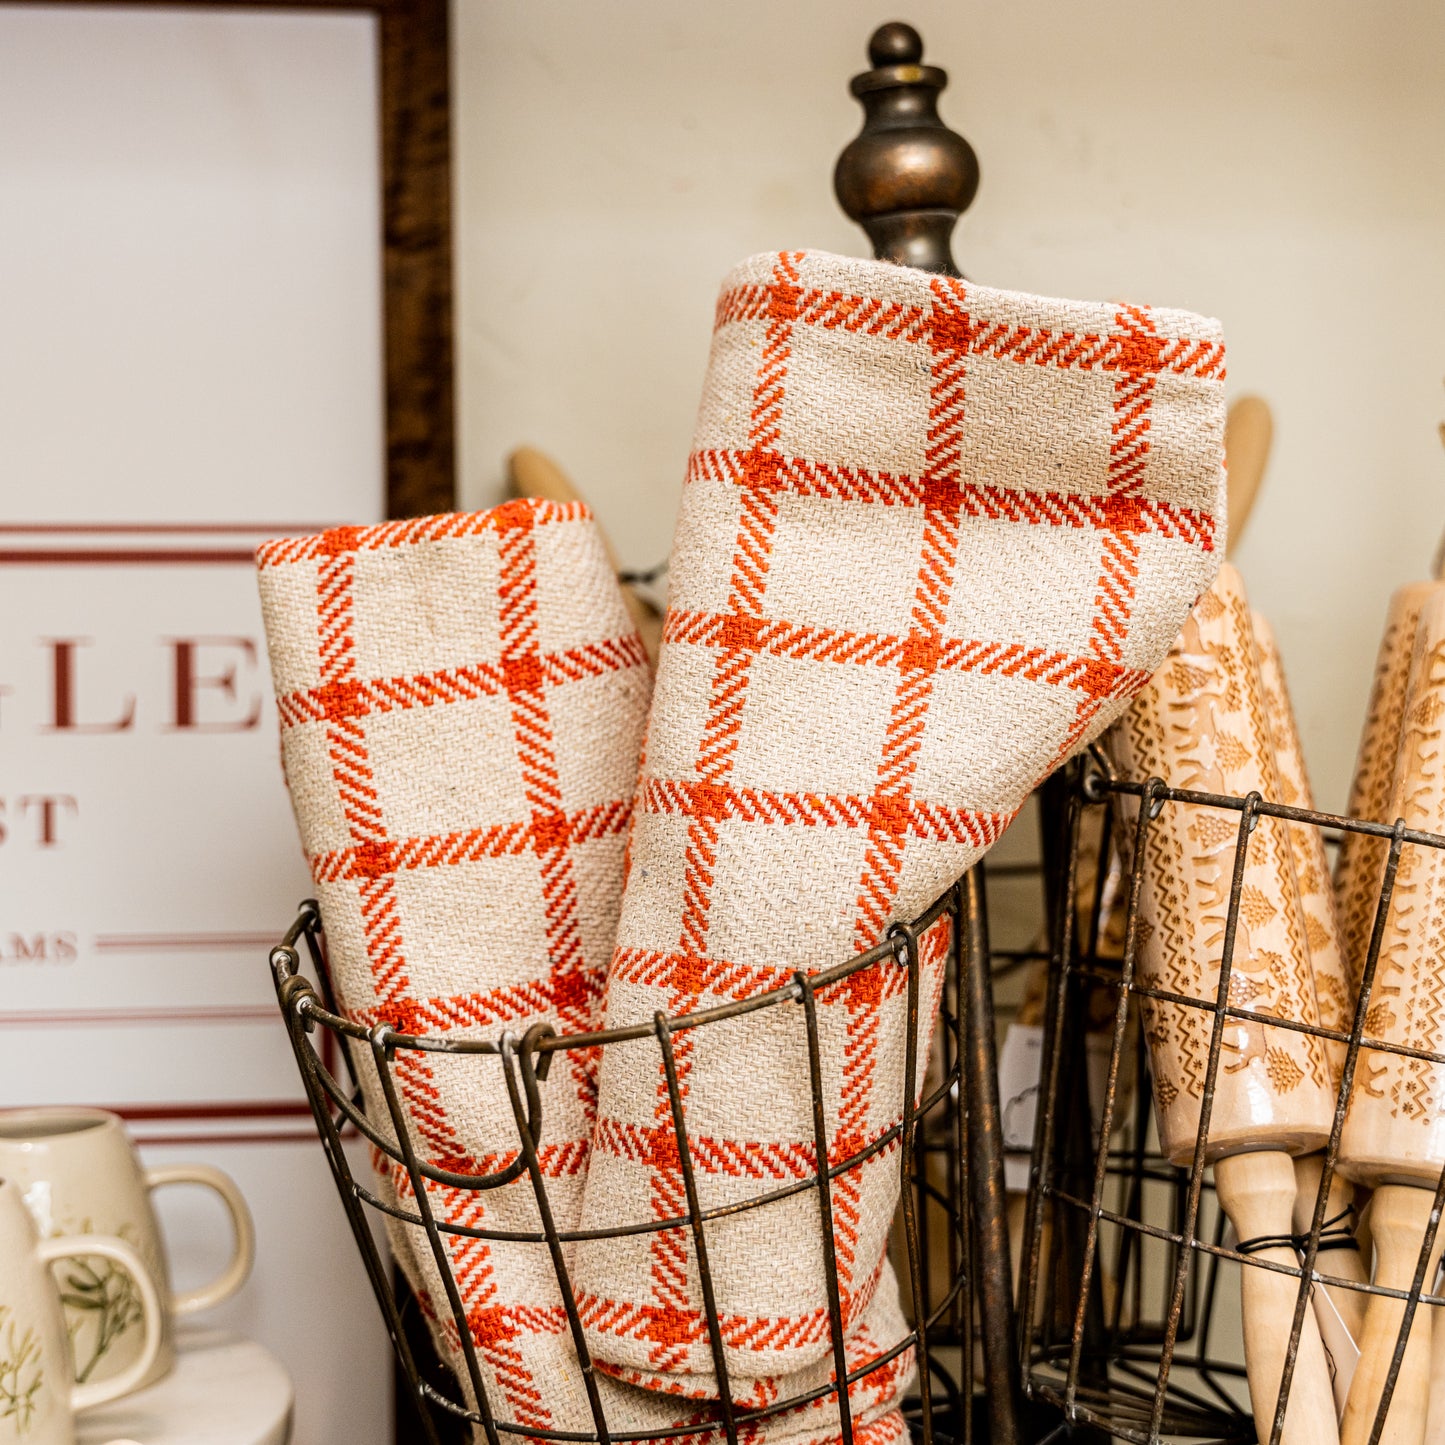 Gingham Kitchen Towels, 3 Styles